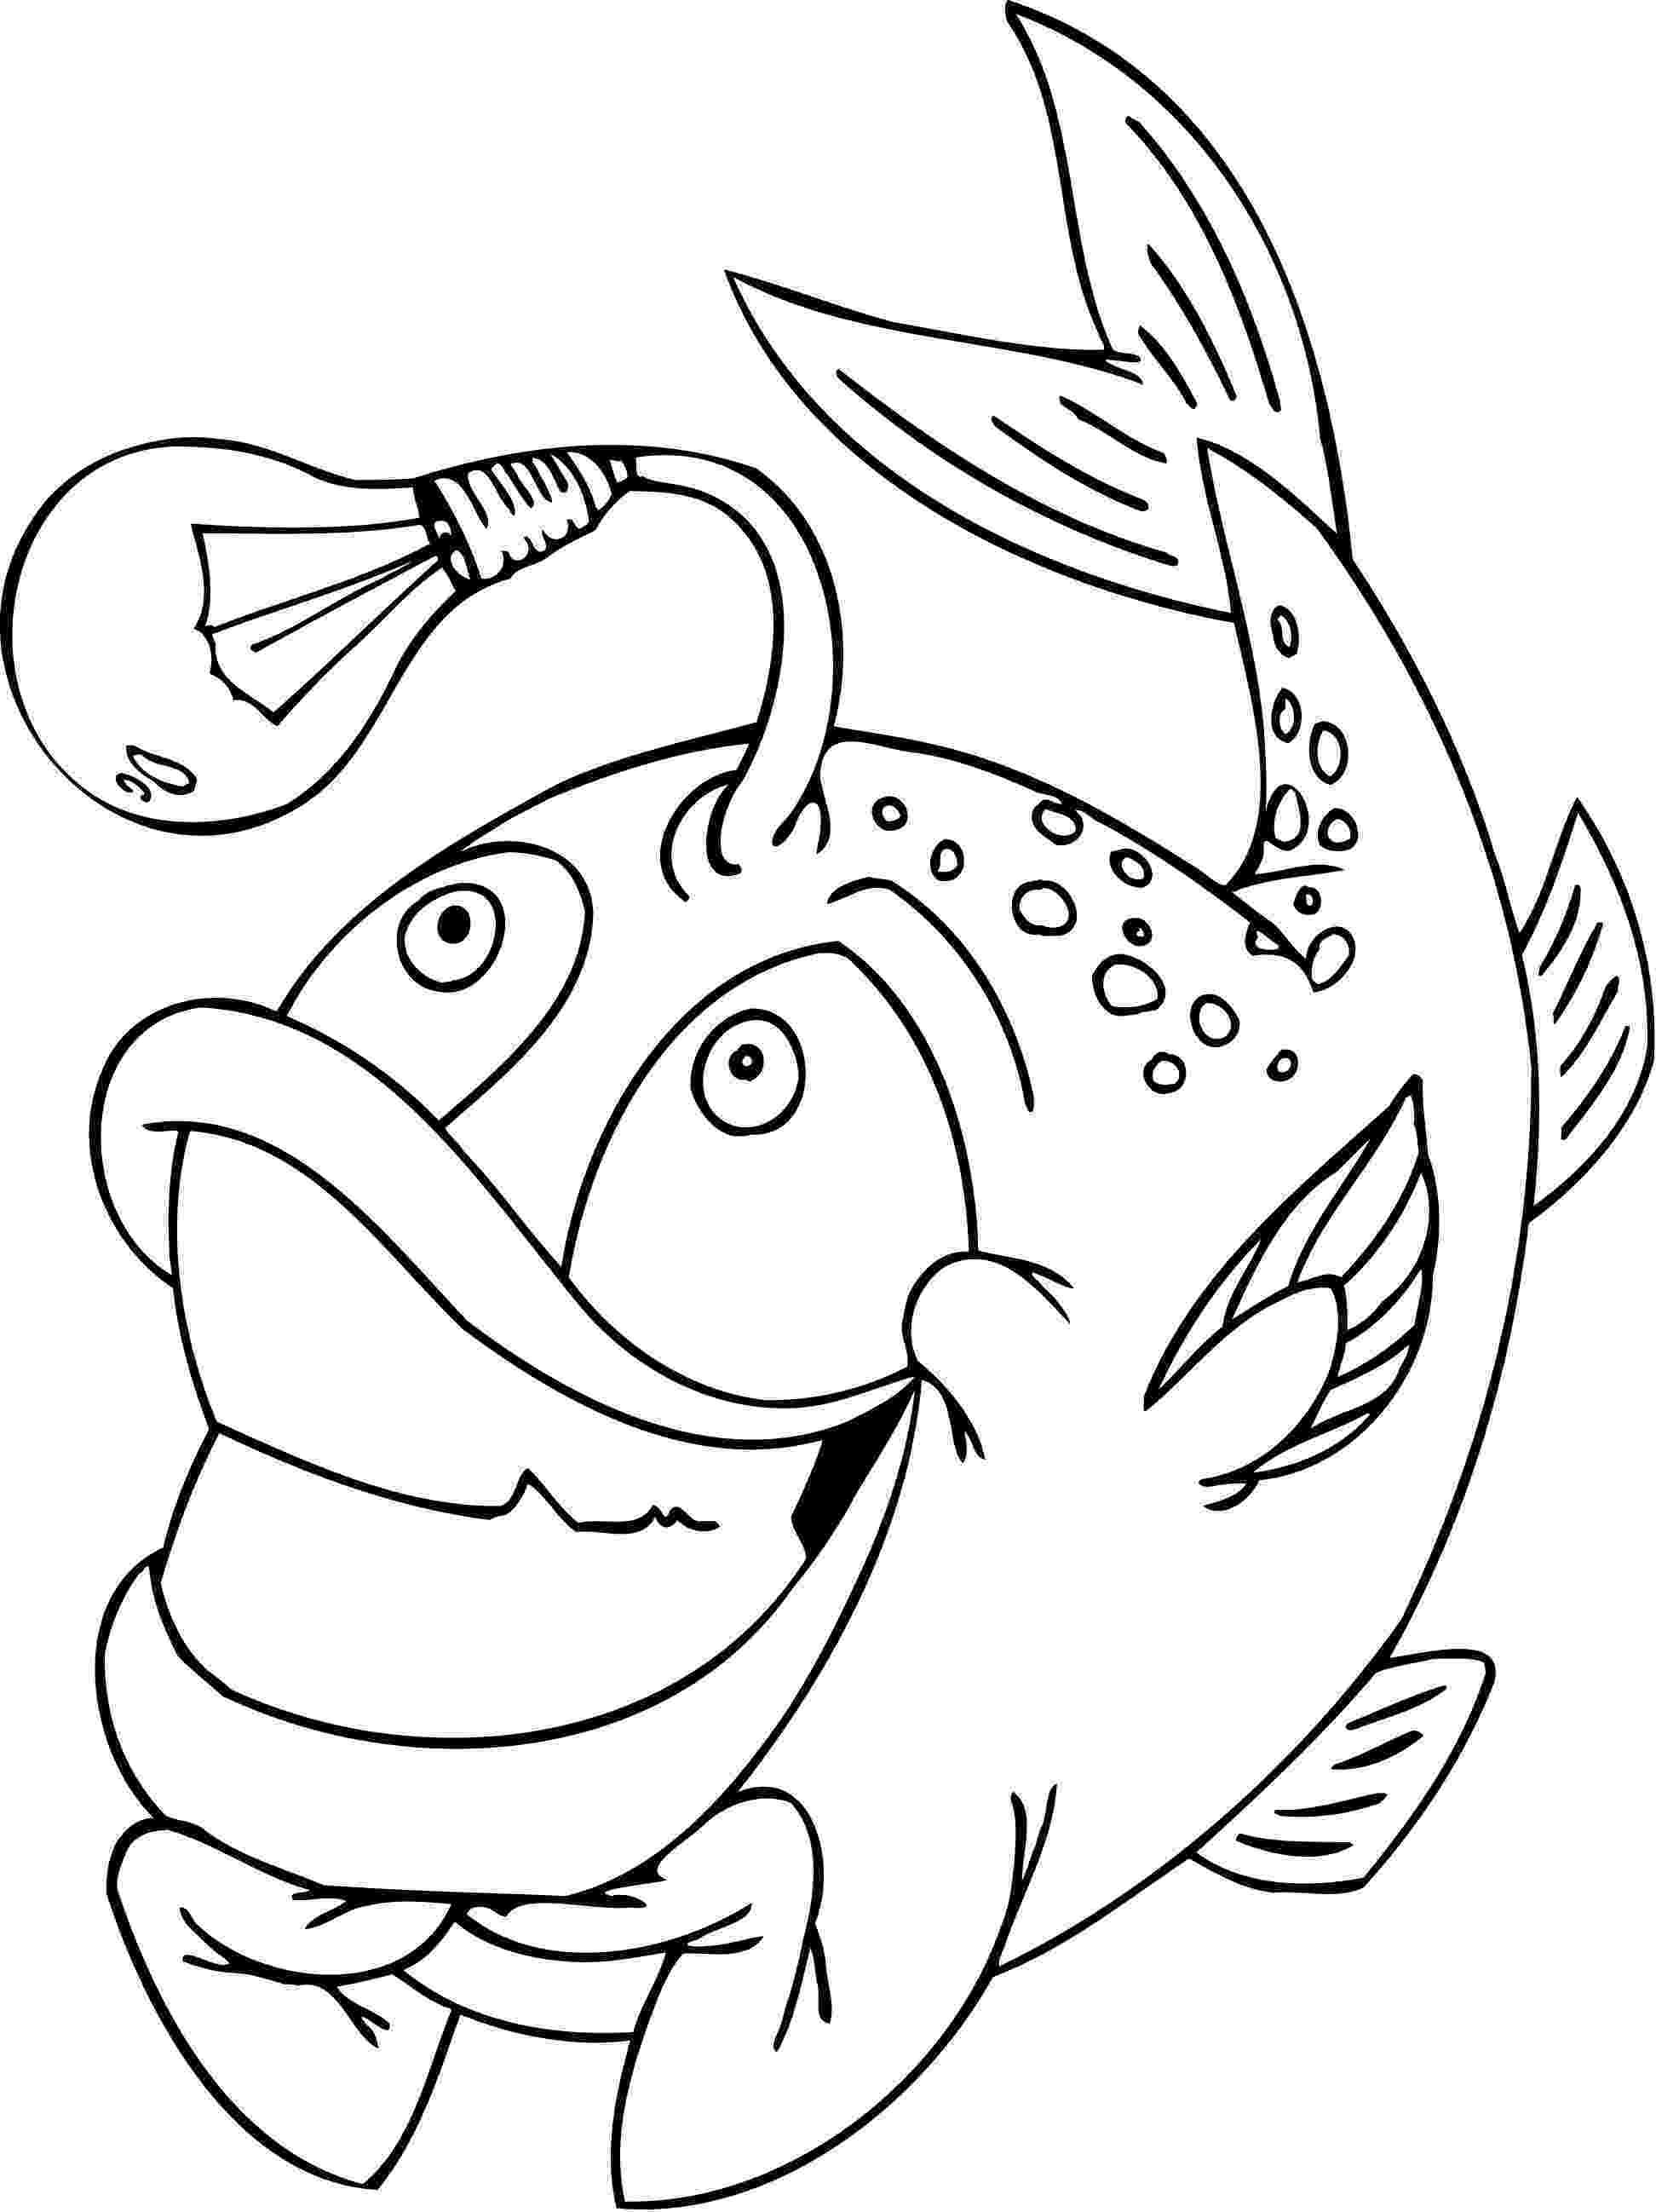 funny coloring pages for adults the frog funny sexy coloring pages for adults from the adults funny pages coloring for 